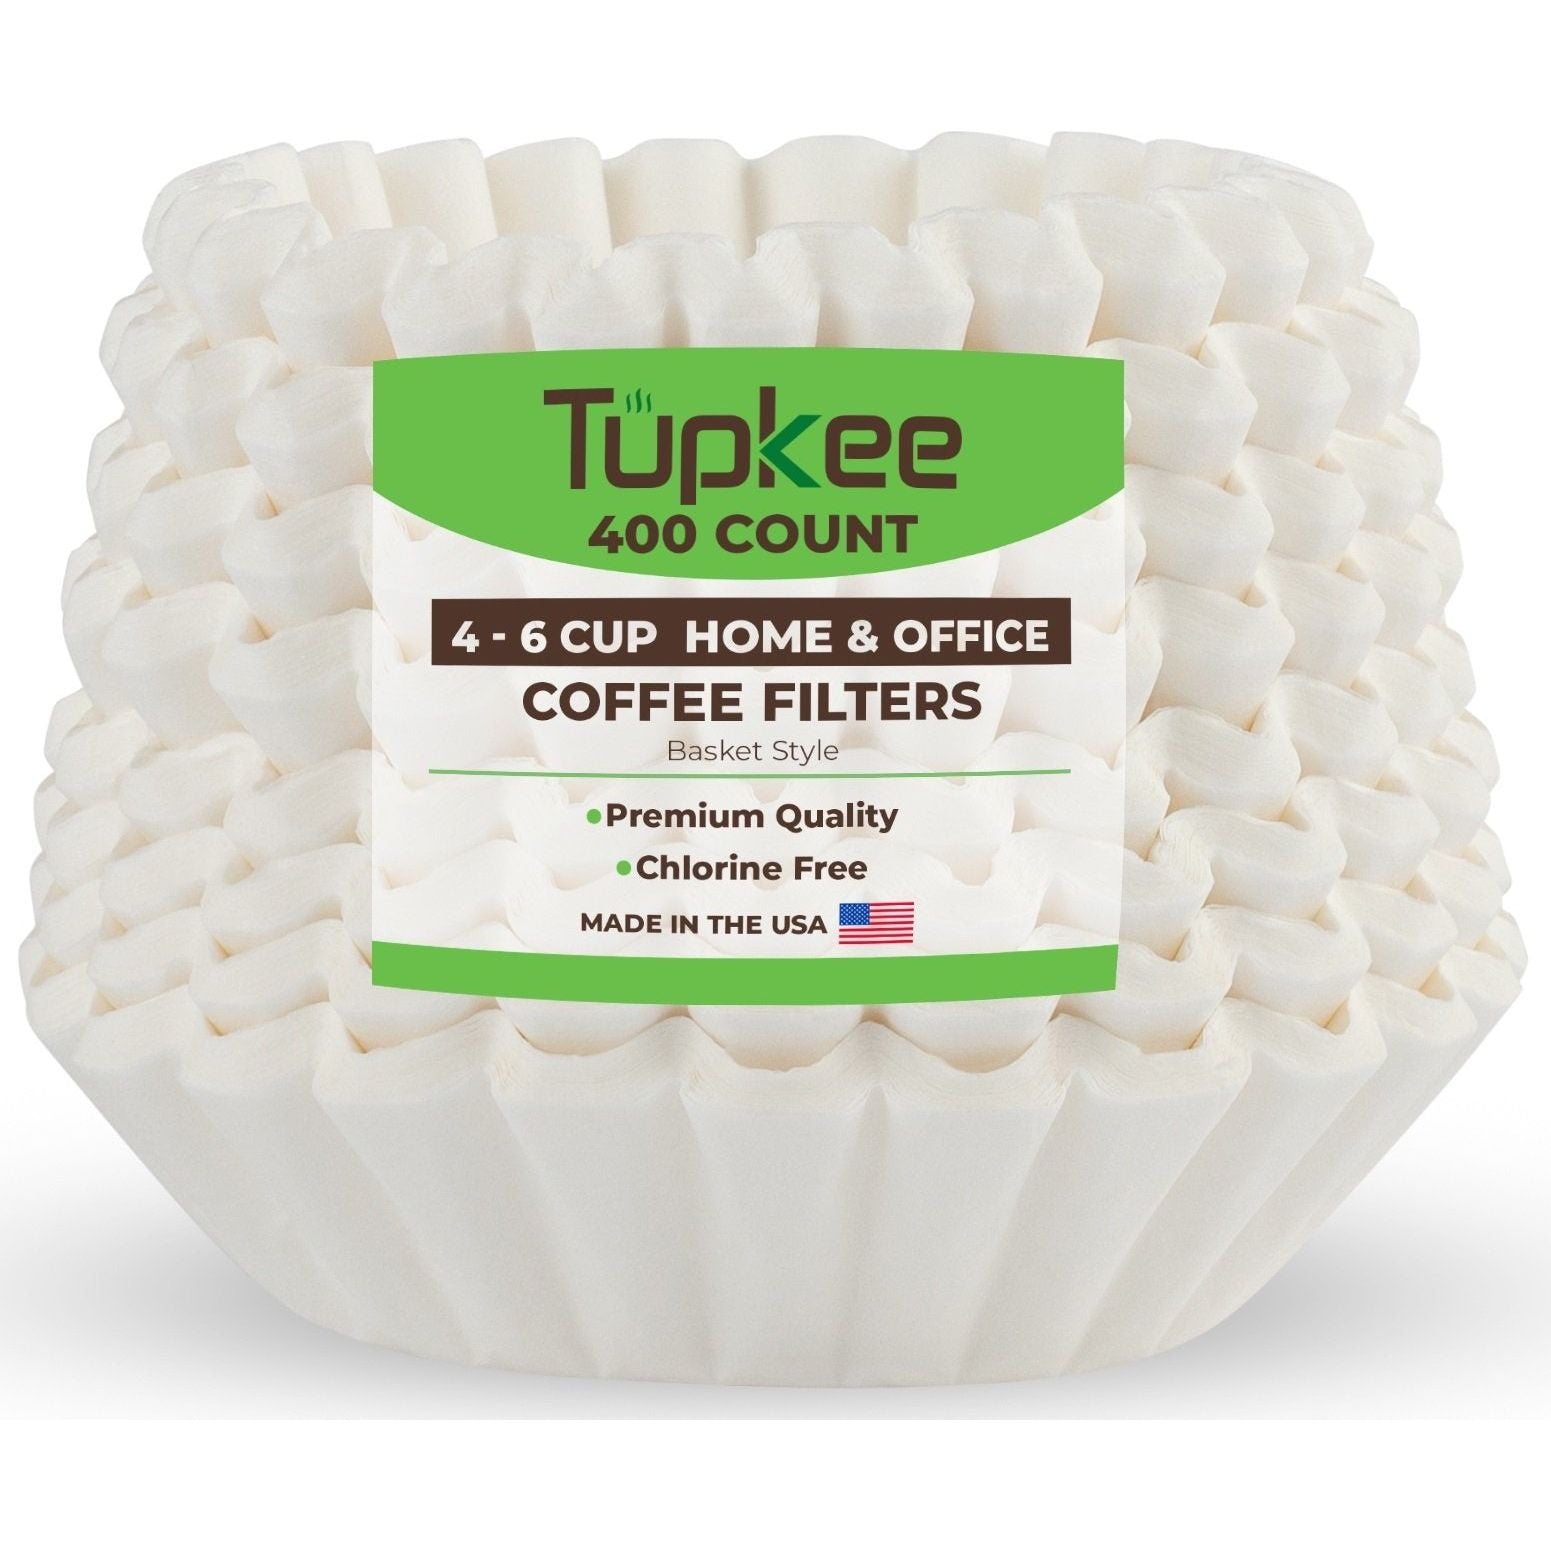 Tupkee Coffee Filters 8-12 Cups - Basket Style, 600 Count, Natural Brown  Unbleached Coffee Filter, Made in the USA